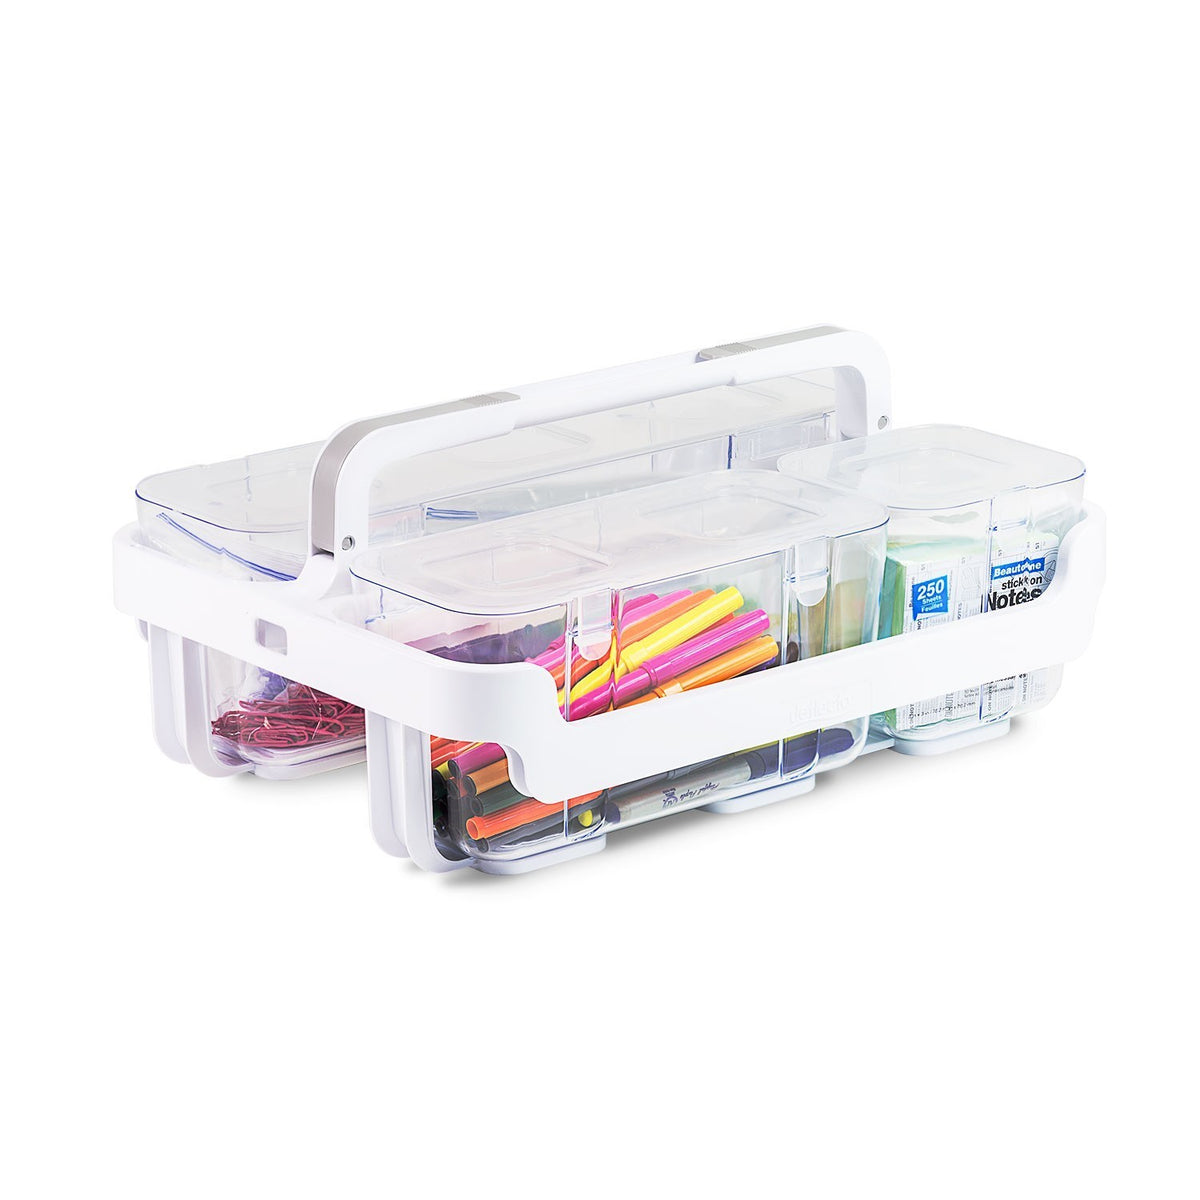 Multipurpose Caddy Organizer Stackable Plastic Caddy with Handle